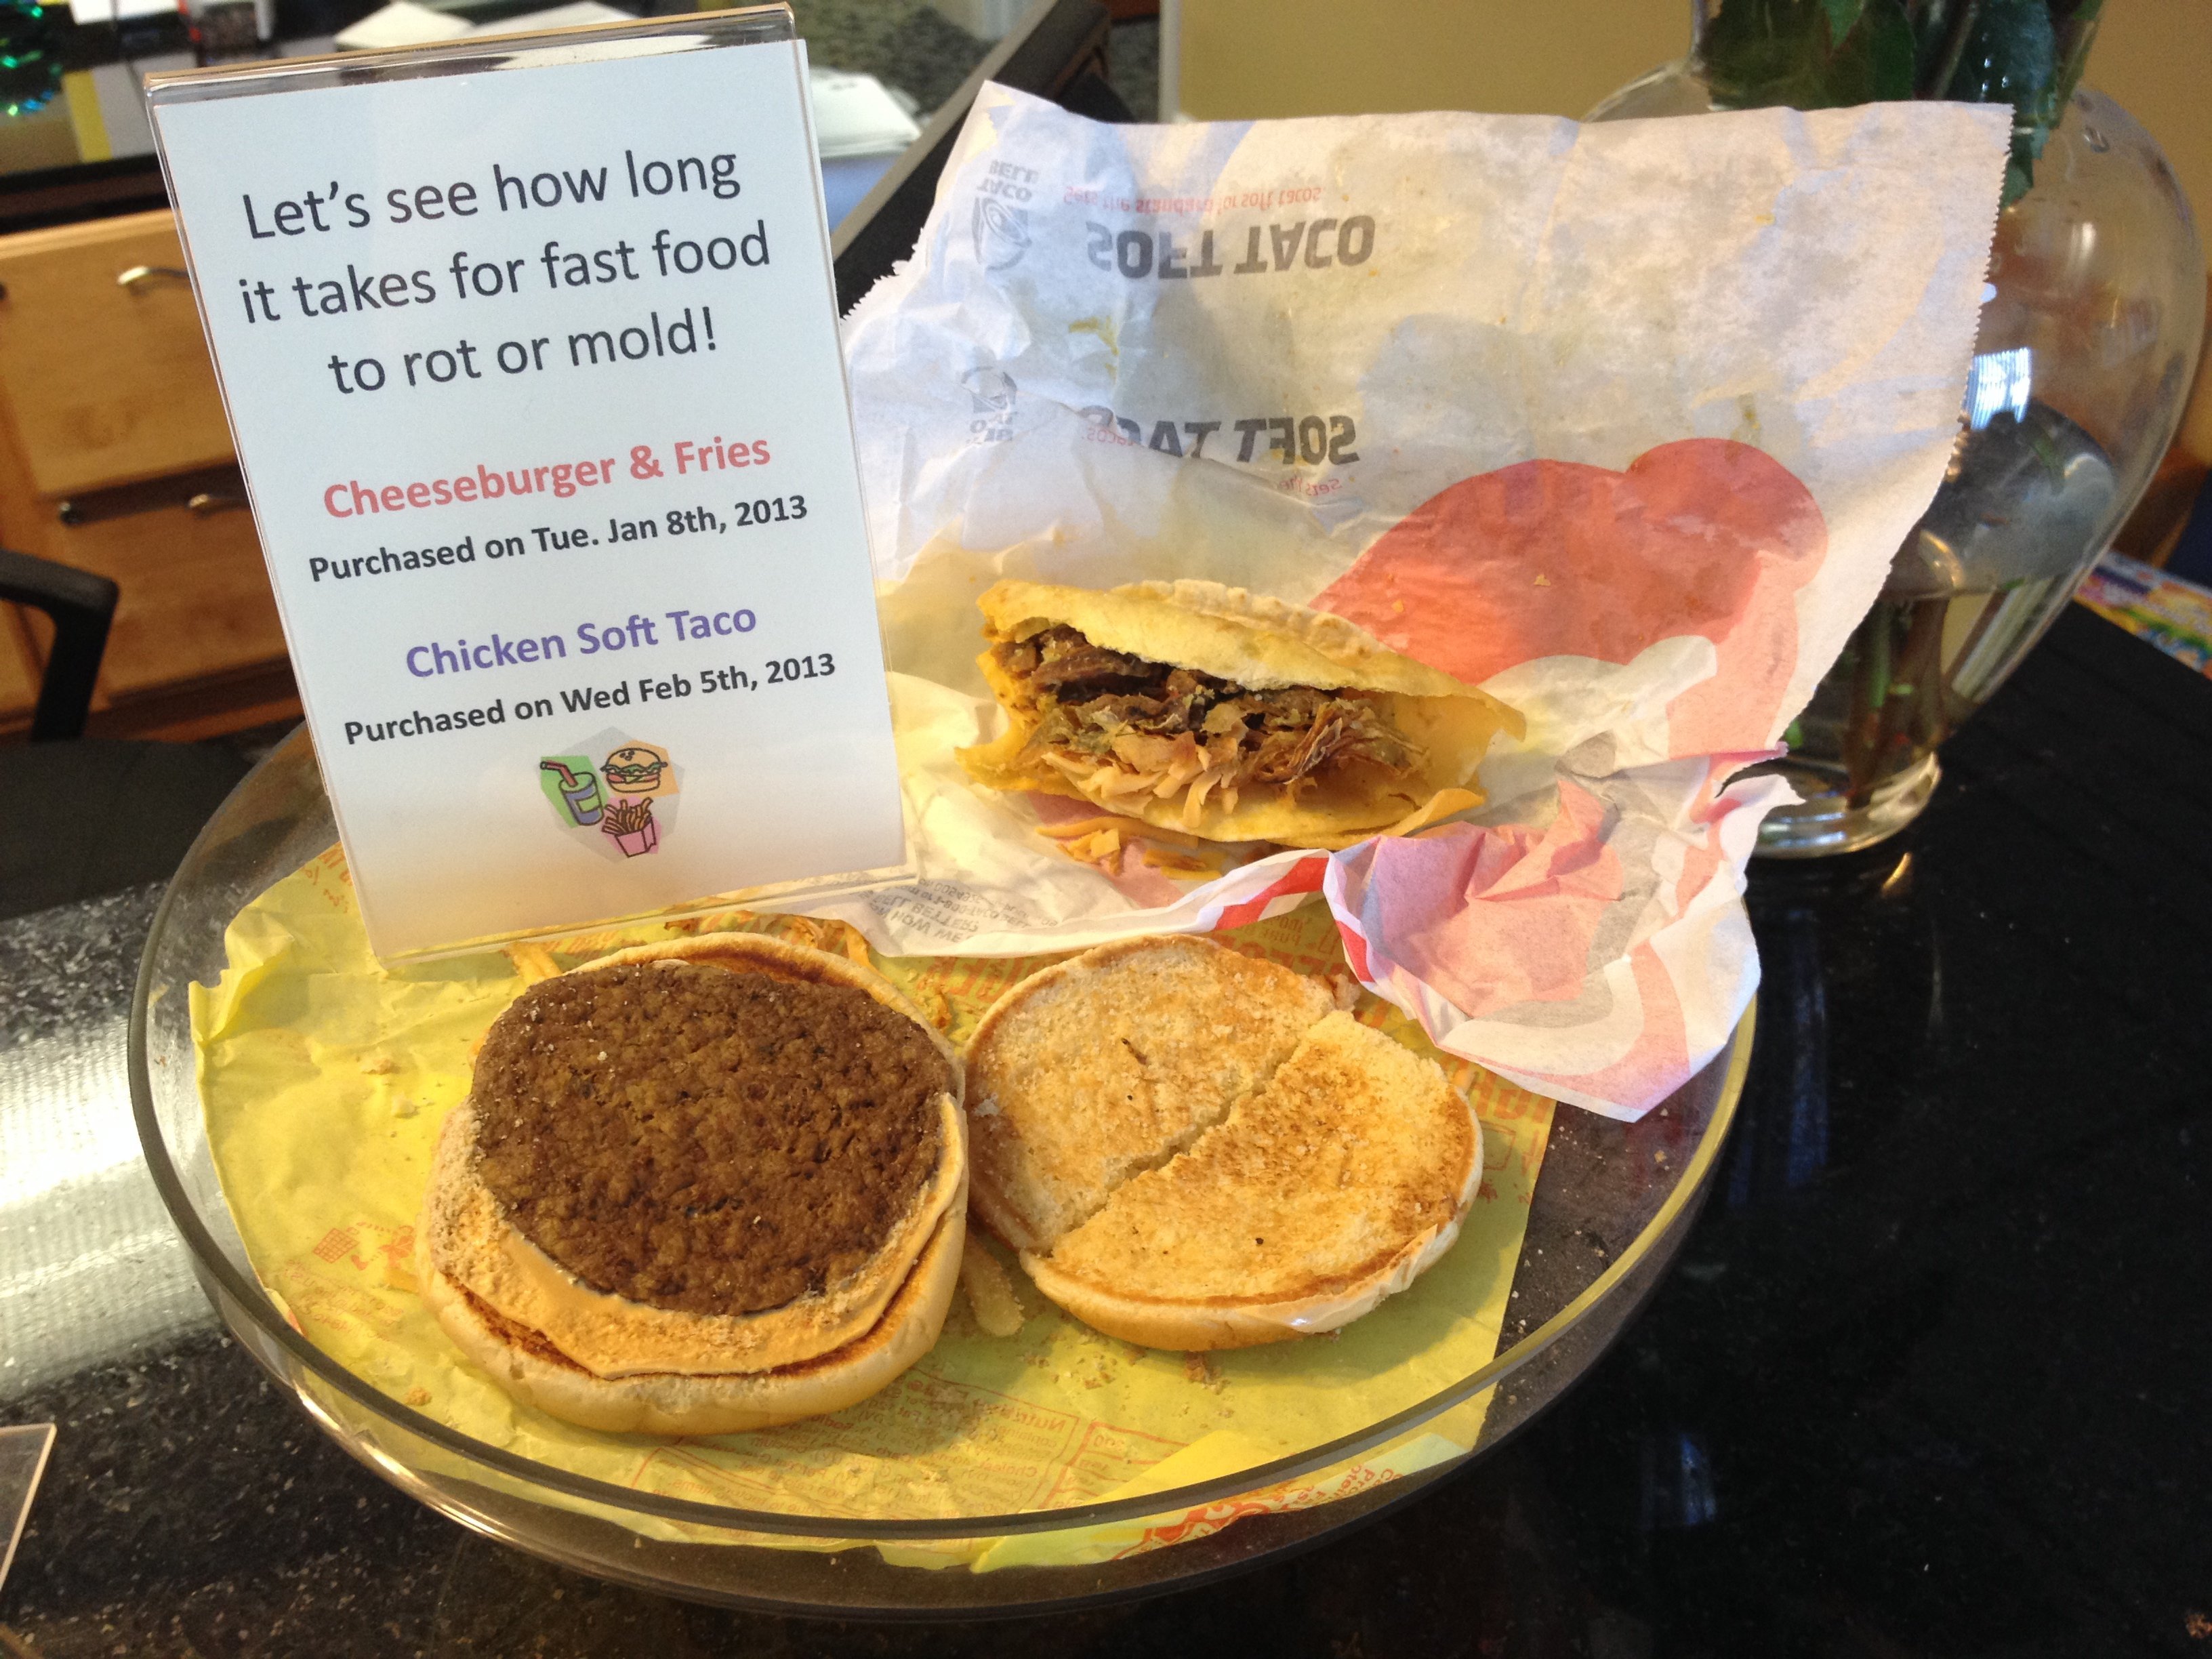 Jessica Freed has been saving a Taco Bell chicken taco and McDonald's cheeseburger with fries for two years, and none of the items have appeared to rot. 